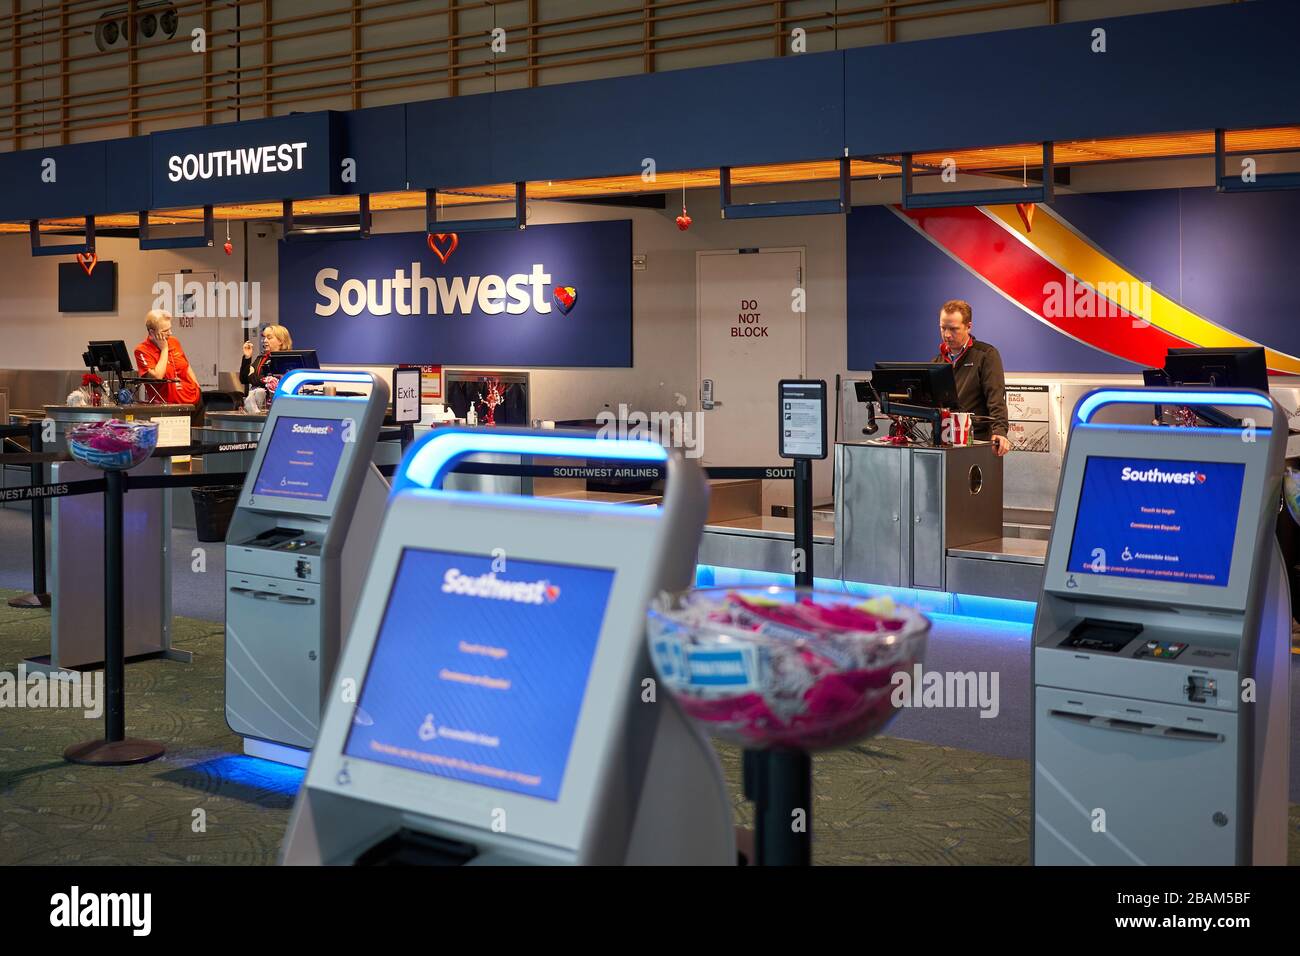 The Southwest Airlines check-in area in Portland International Airport on Feb 7, 2020. Stock Photo